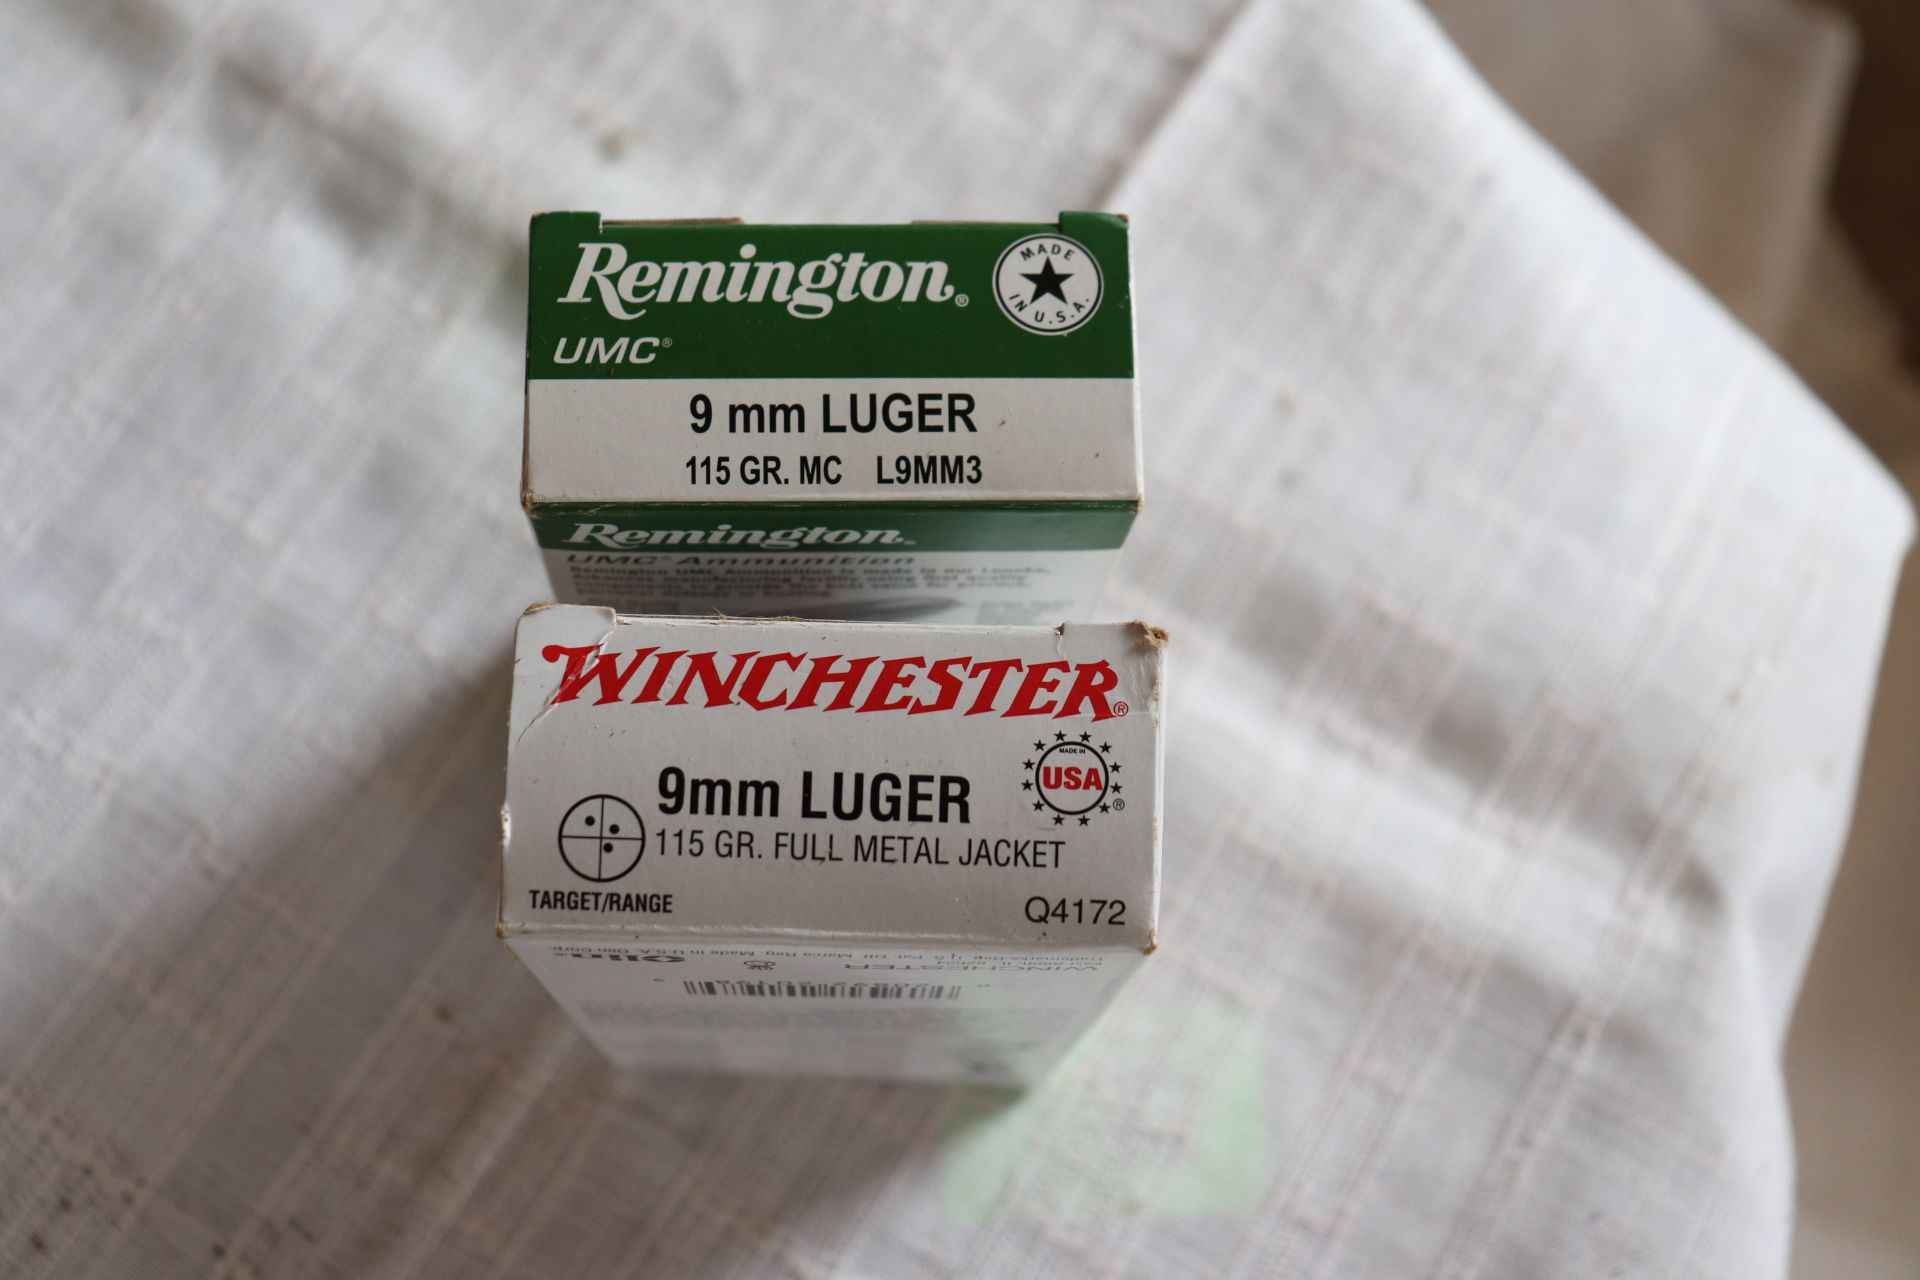 9mm Luger 115 grain 100 rounds by Remington and Winchester, All State and Federal Firearms License w - Image 2 of 2